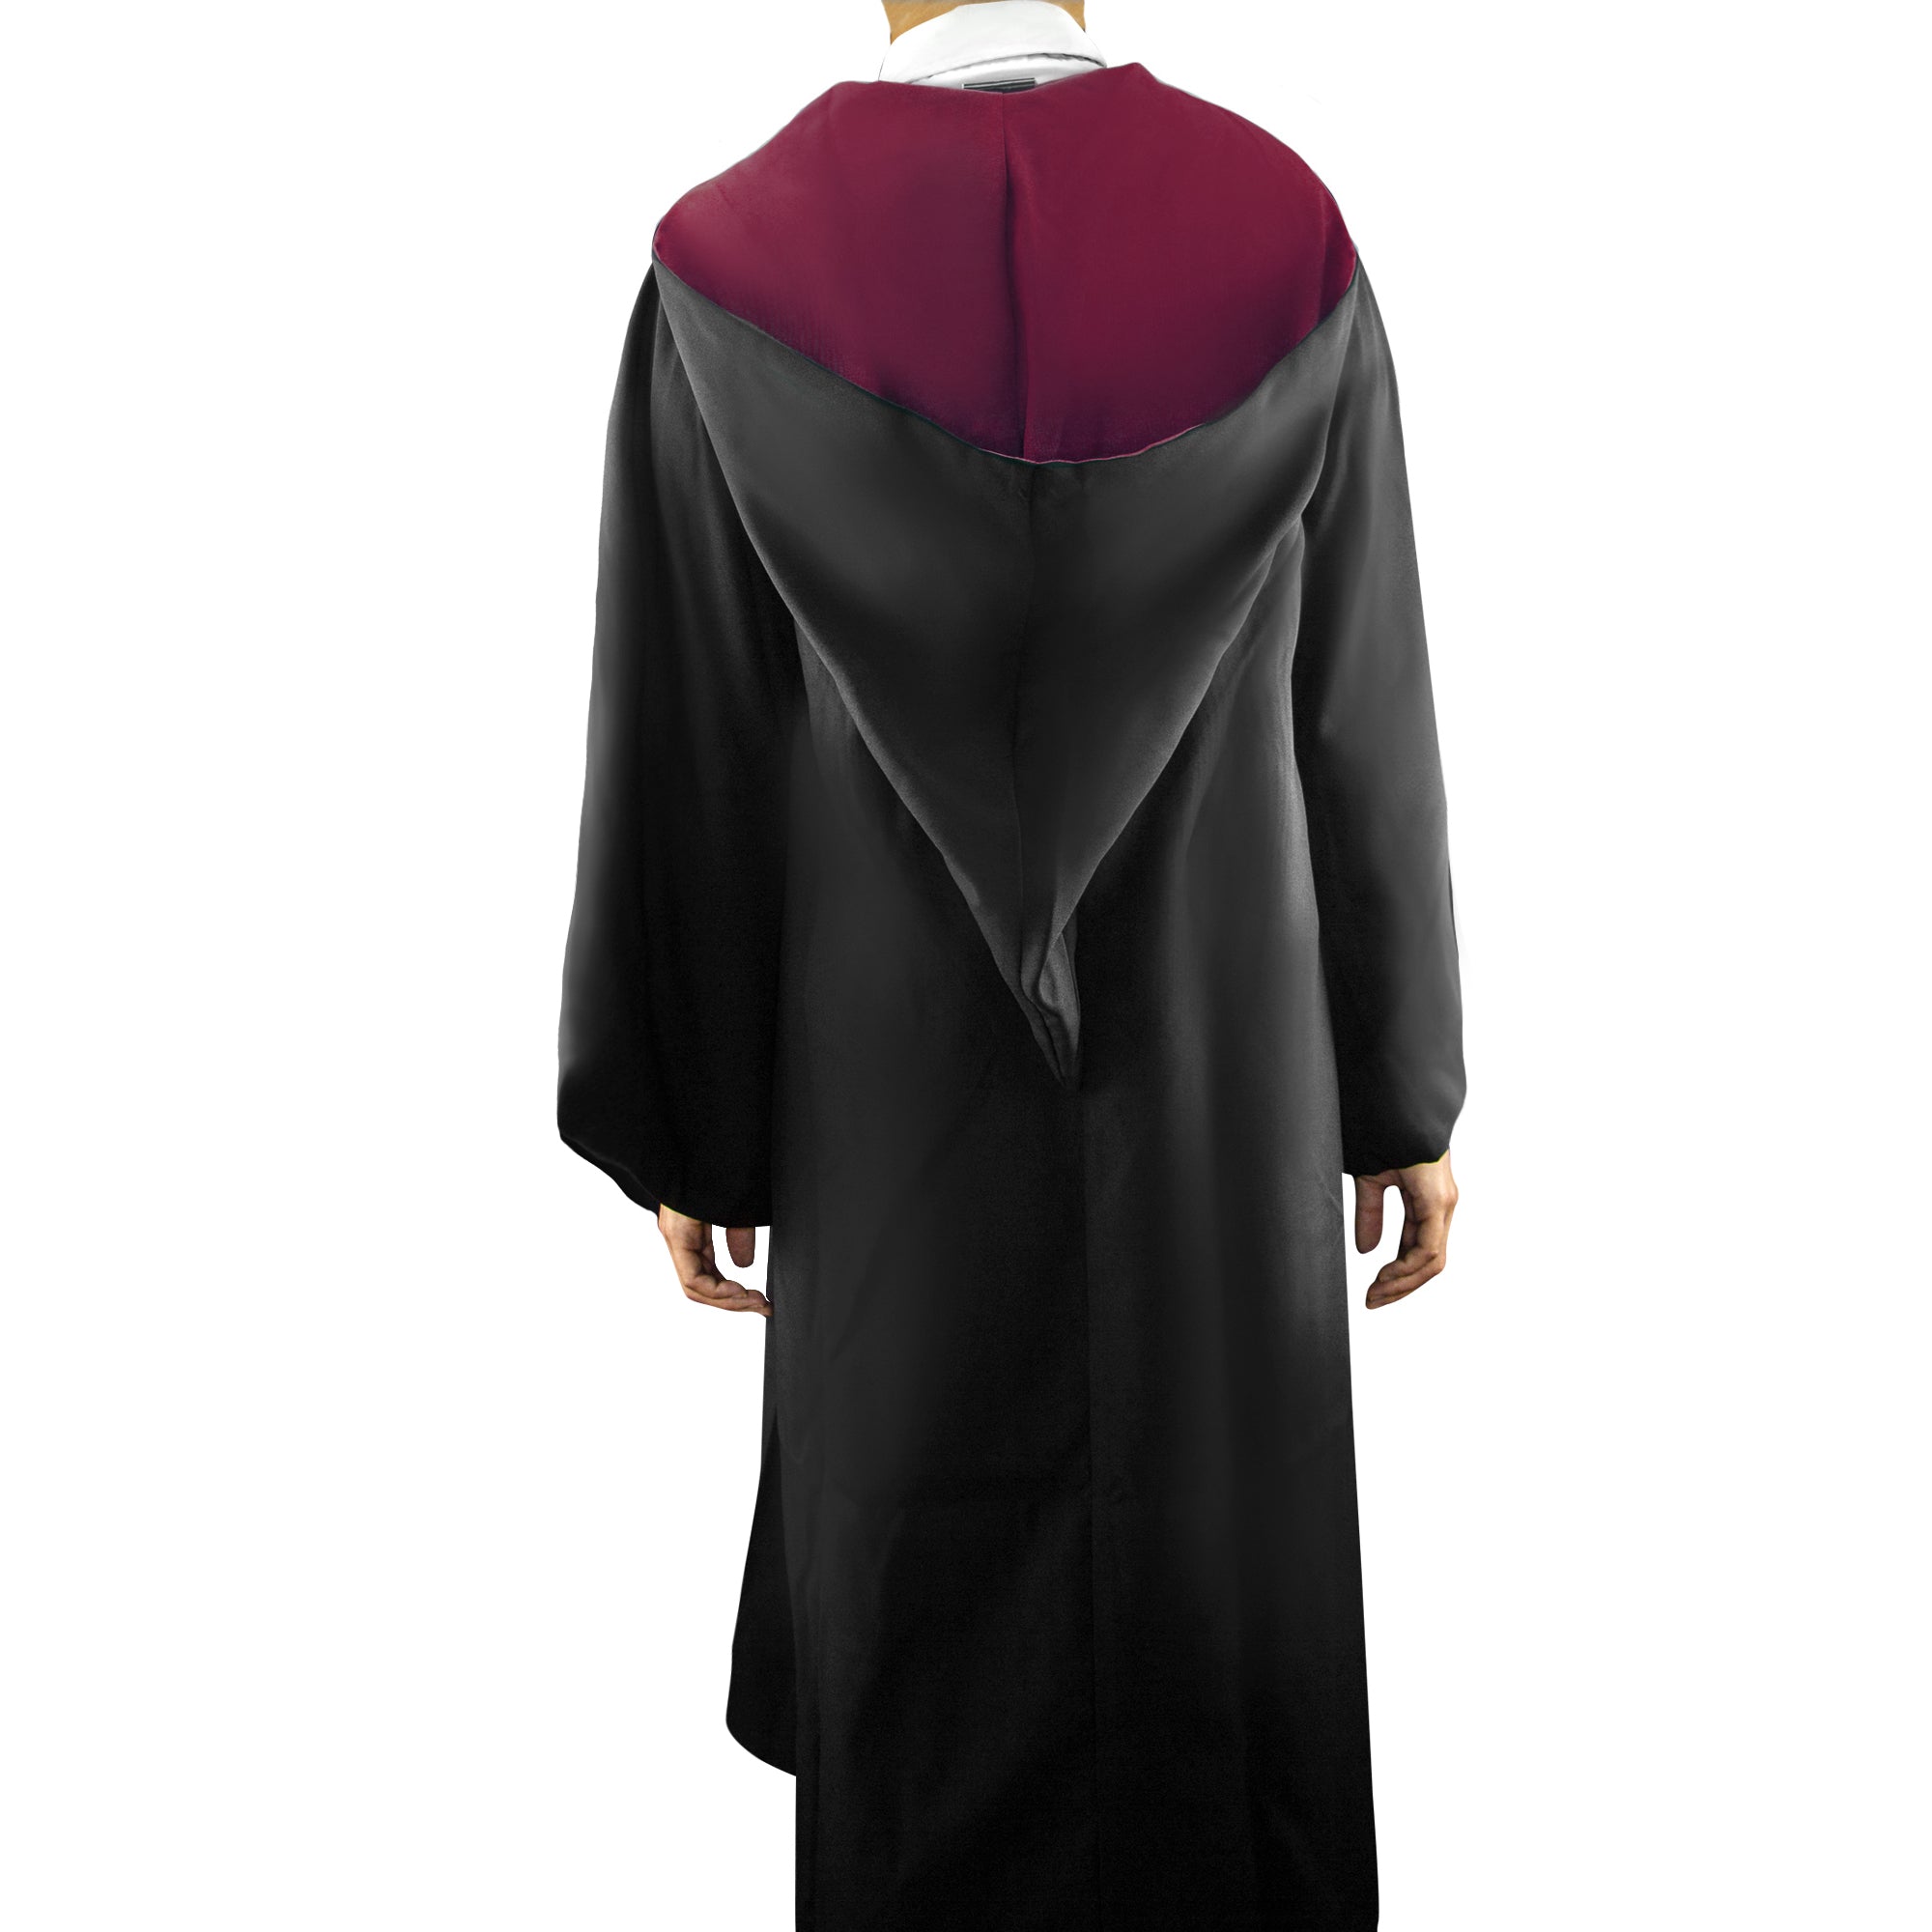 Adults Replica Harry Potter™ Gryffindor Robe Costume